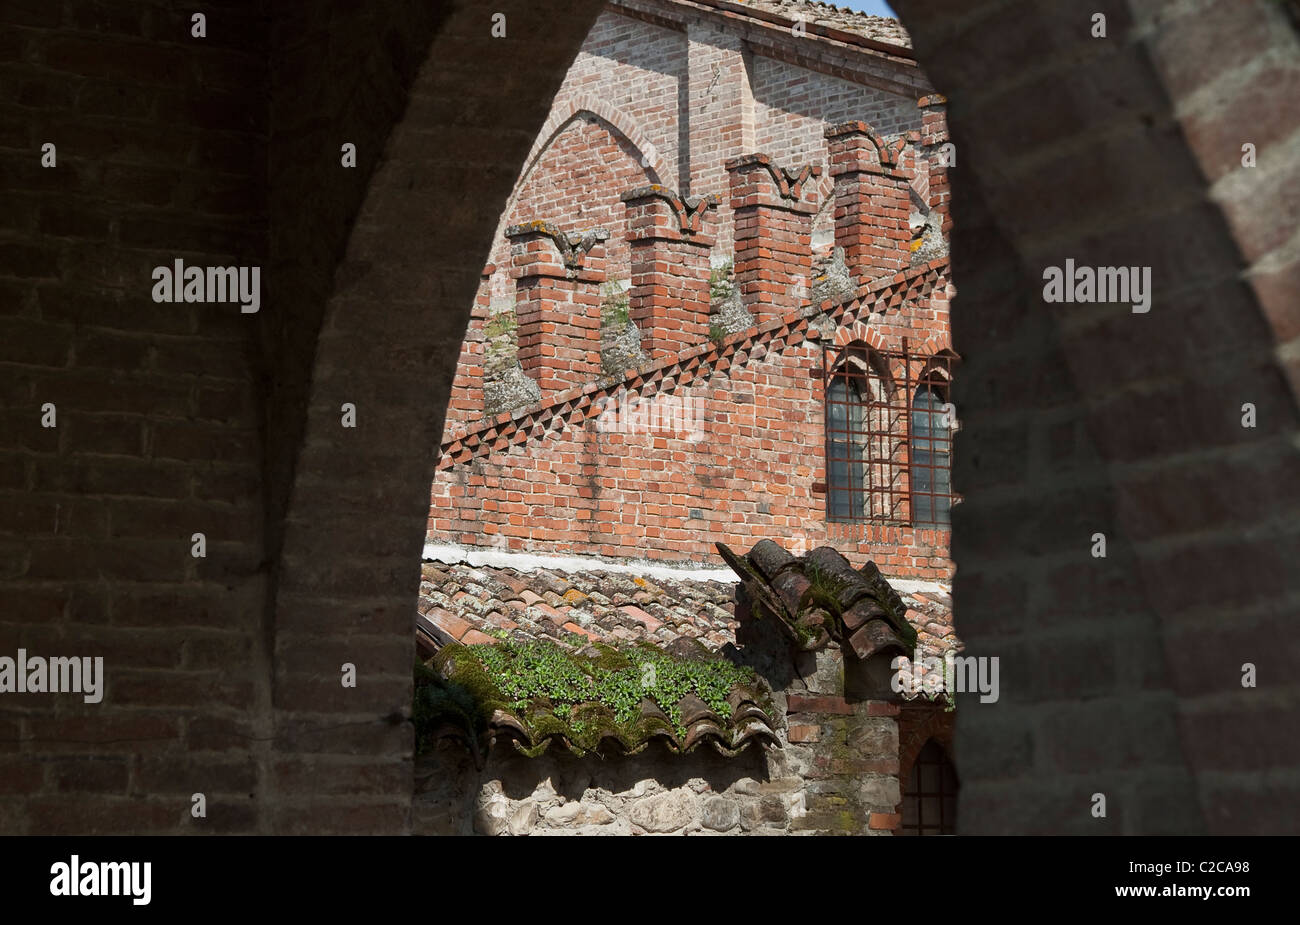 medieval architecture Stock Photo